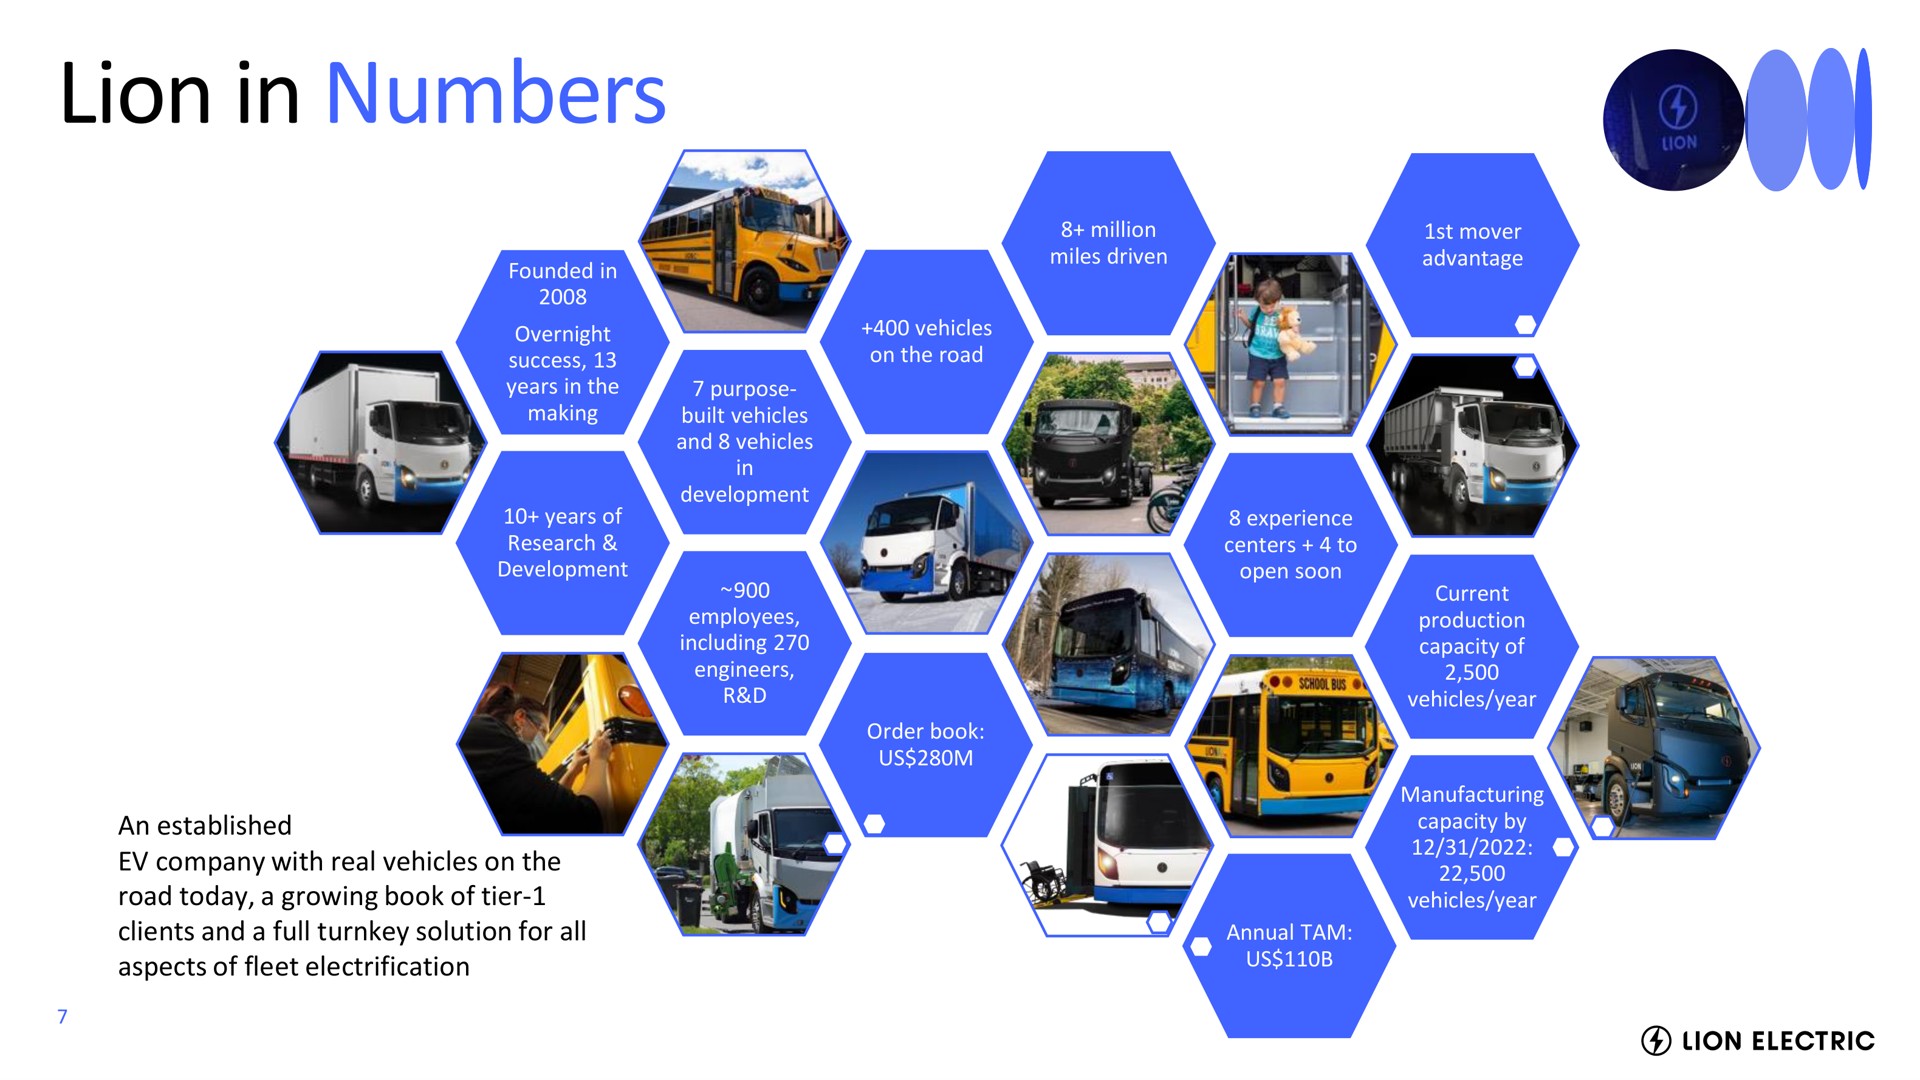 lion in numbers | Lion Electric